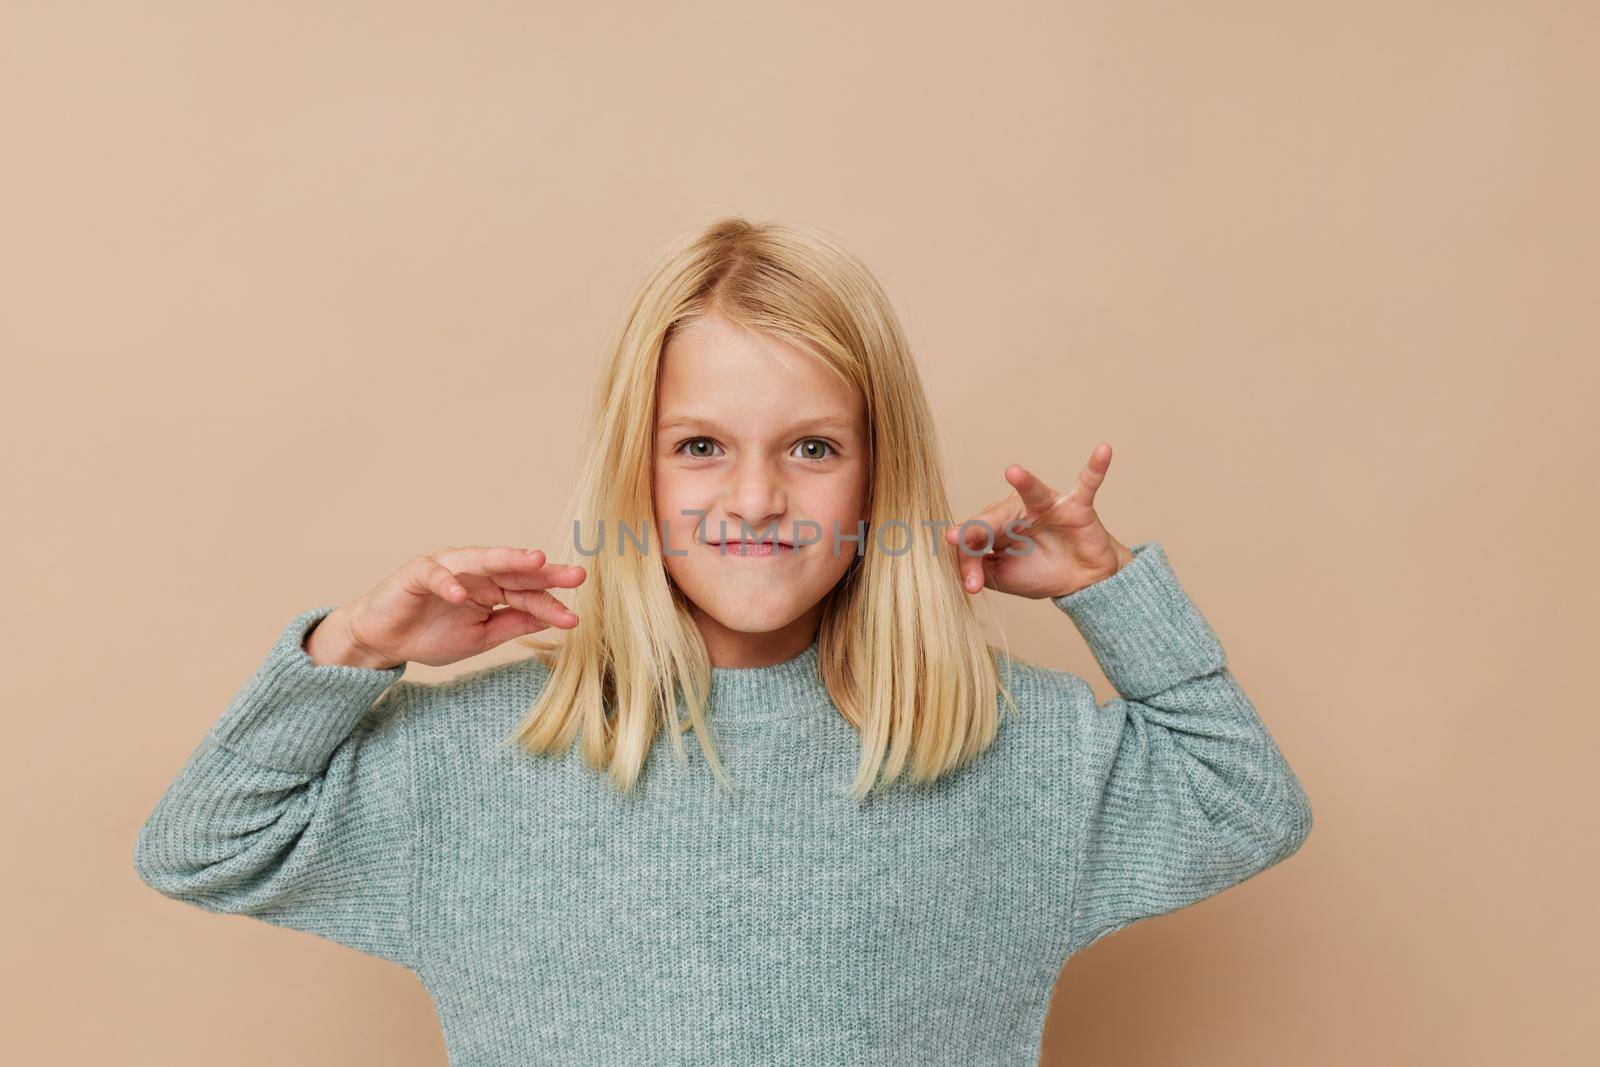 emotional girl in a sweater, grimaces kids lifestyle concept by SHOTPRIME